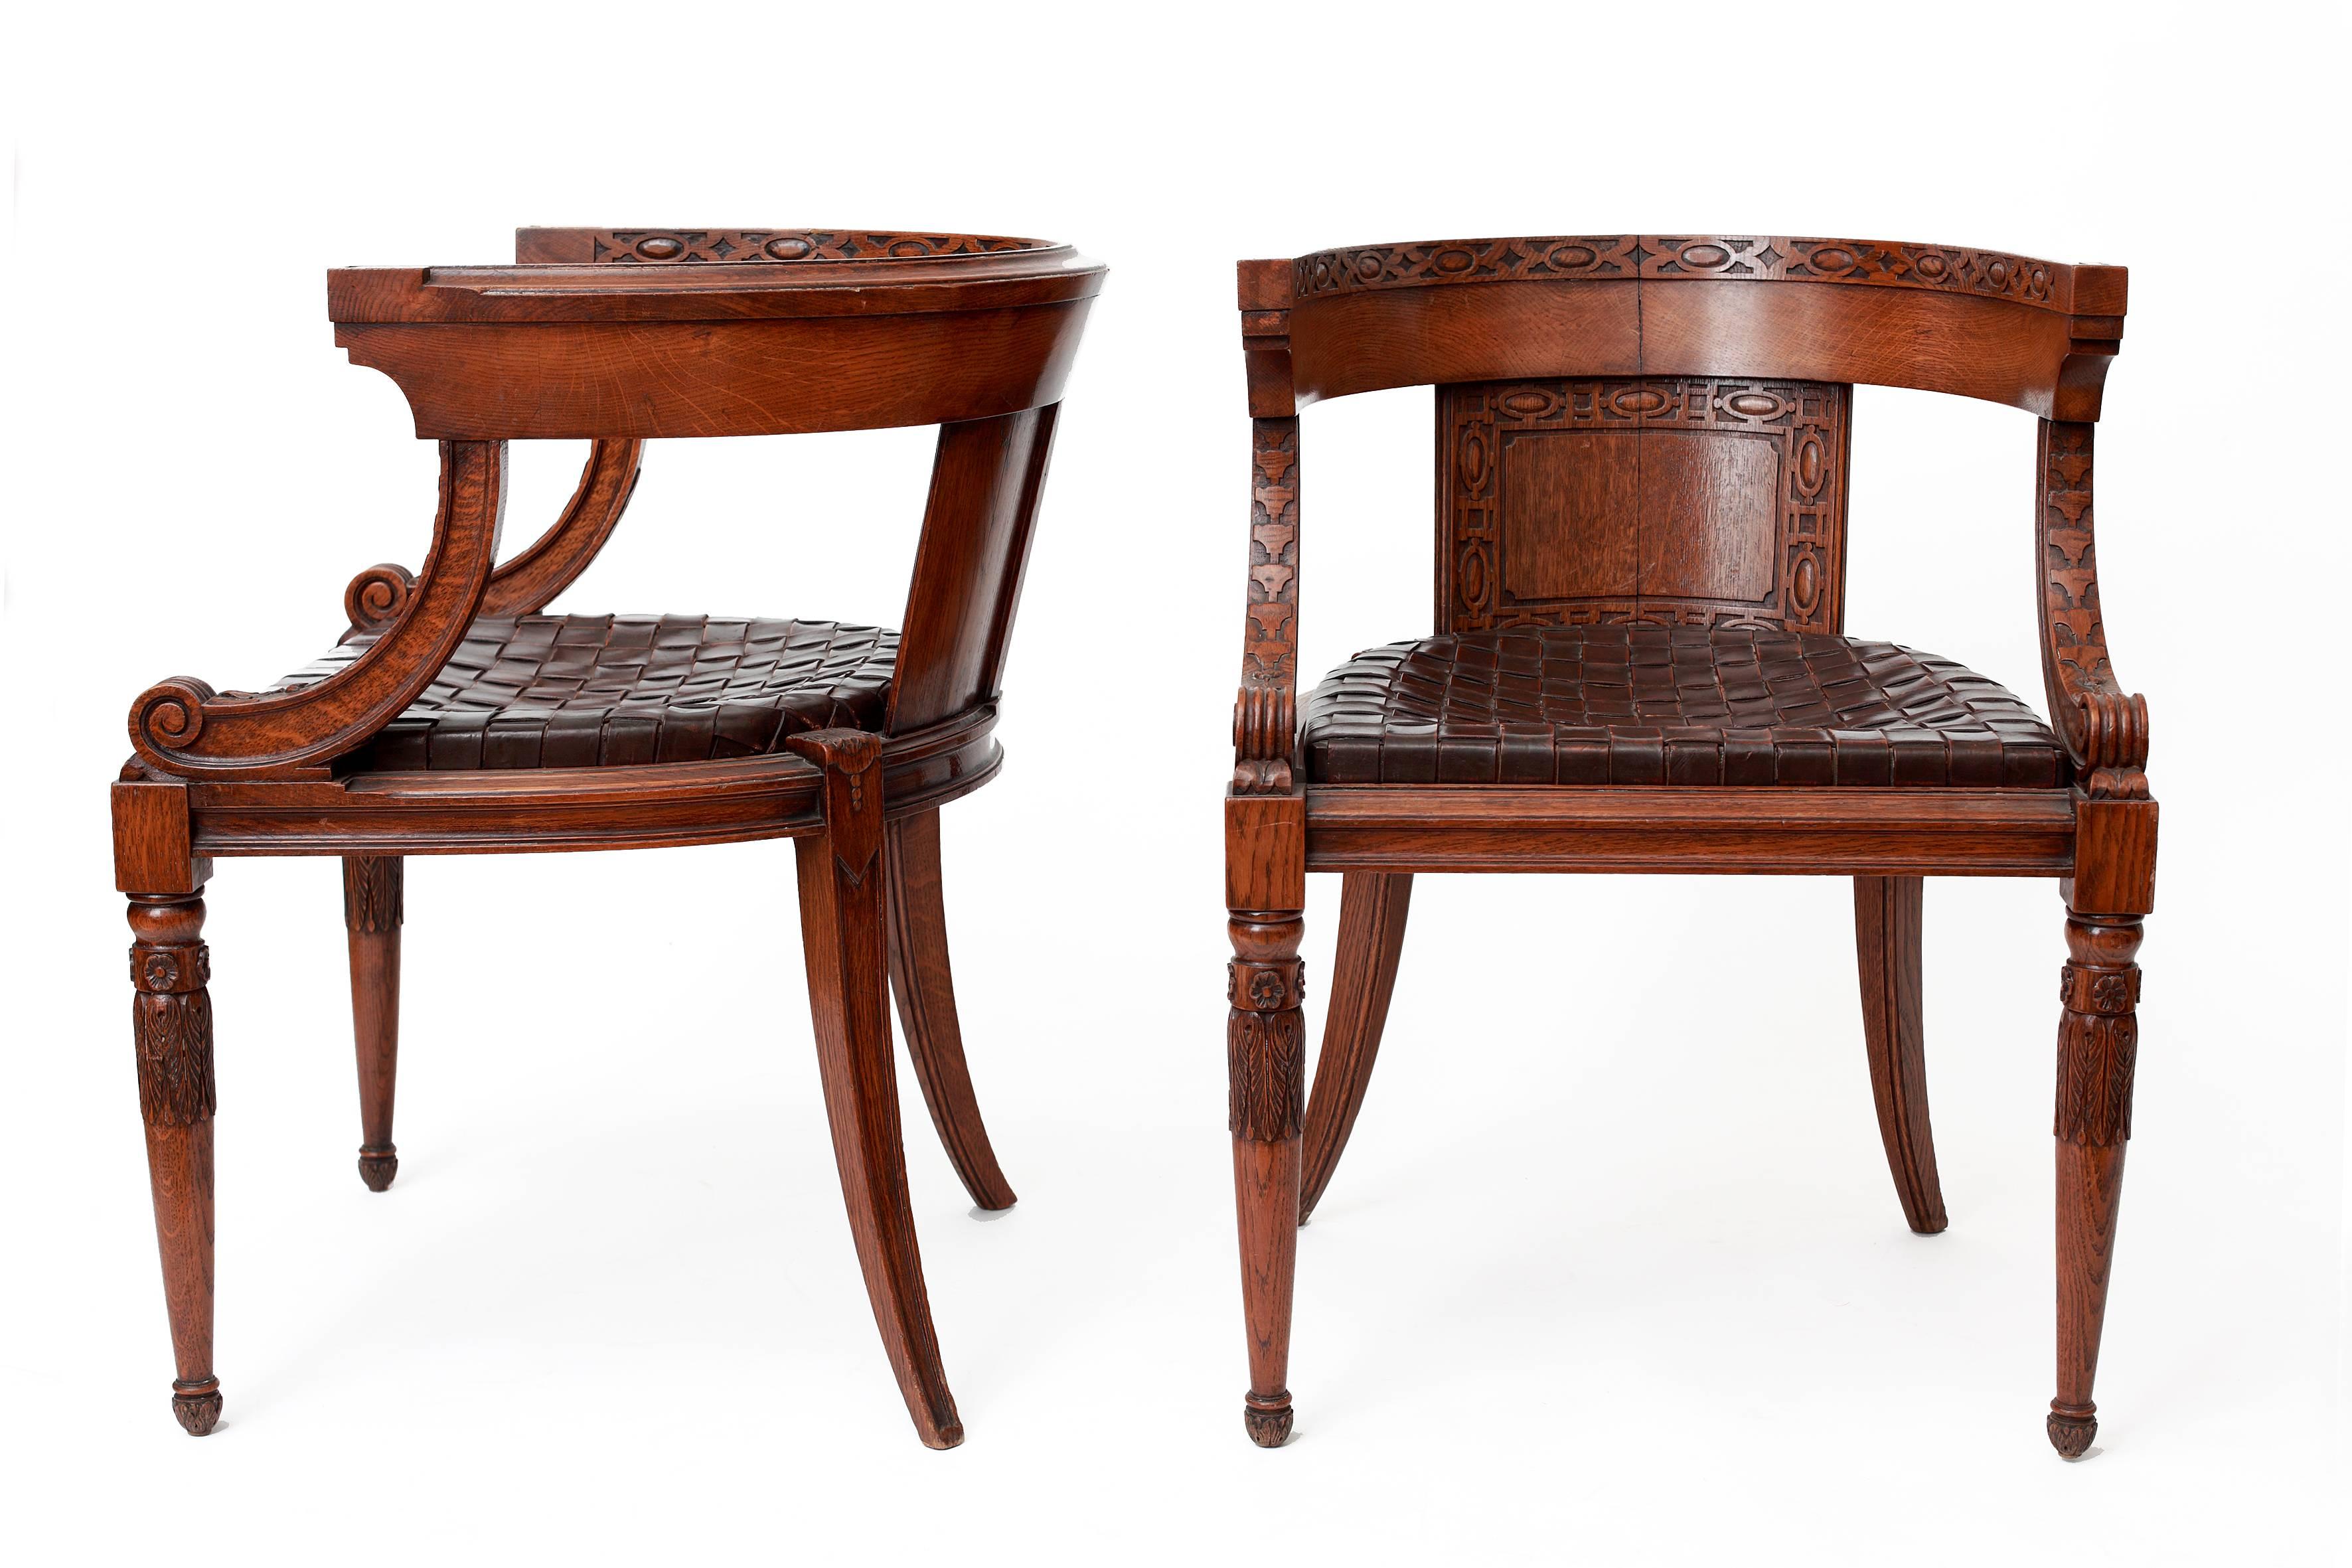 Pair of oak garden chairs decorated with designs inspired by the spirit of classic Antiquity such as acanthus leaves, Greek geometric and linear patterns. The seat consists of the original interlaced leather straps.
H. 75 cm, seat H. 47,50 cm, W.